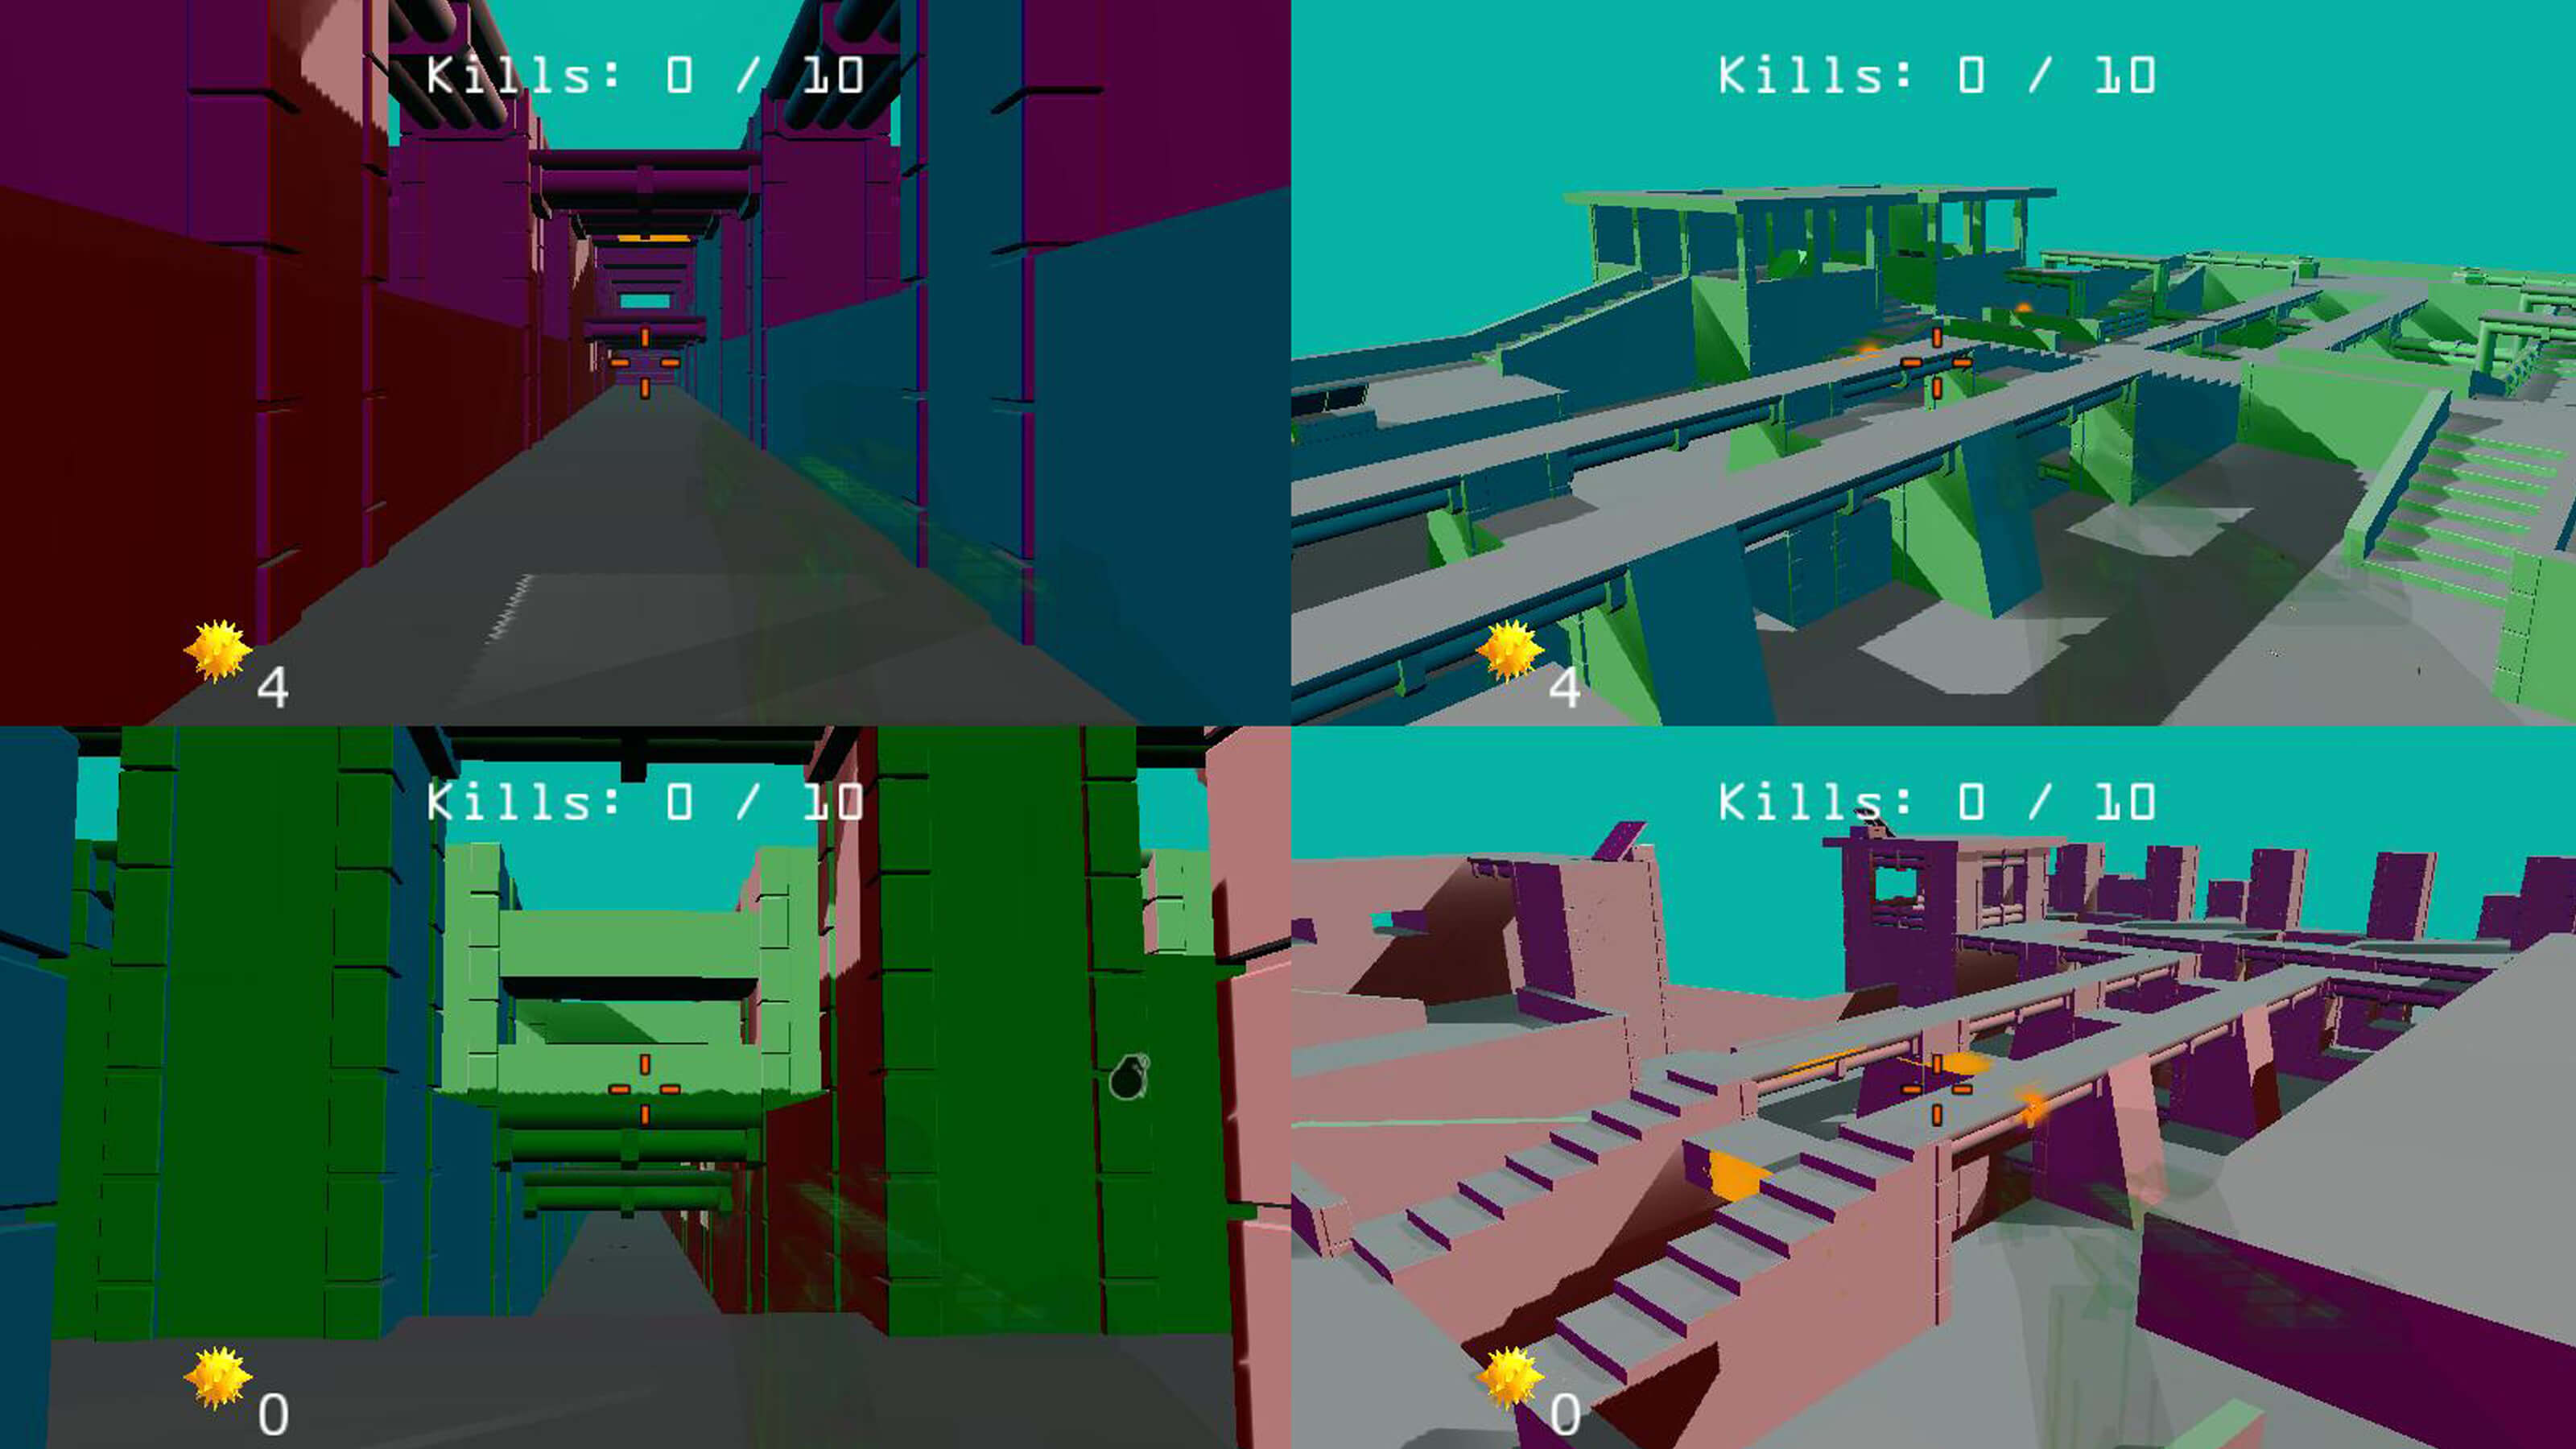 A four-player split-screen view of the abstract game level.